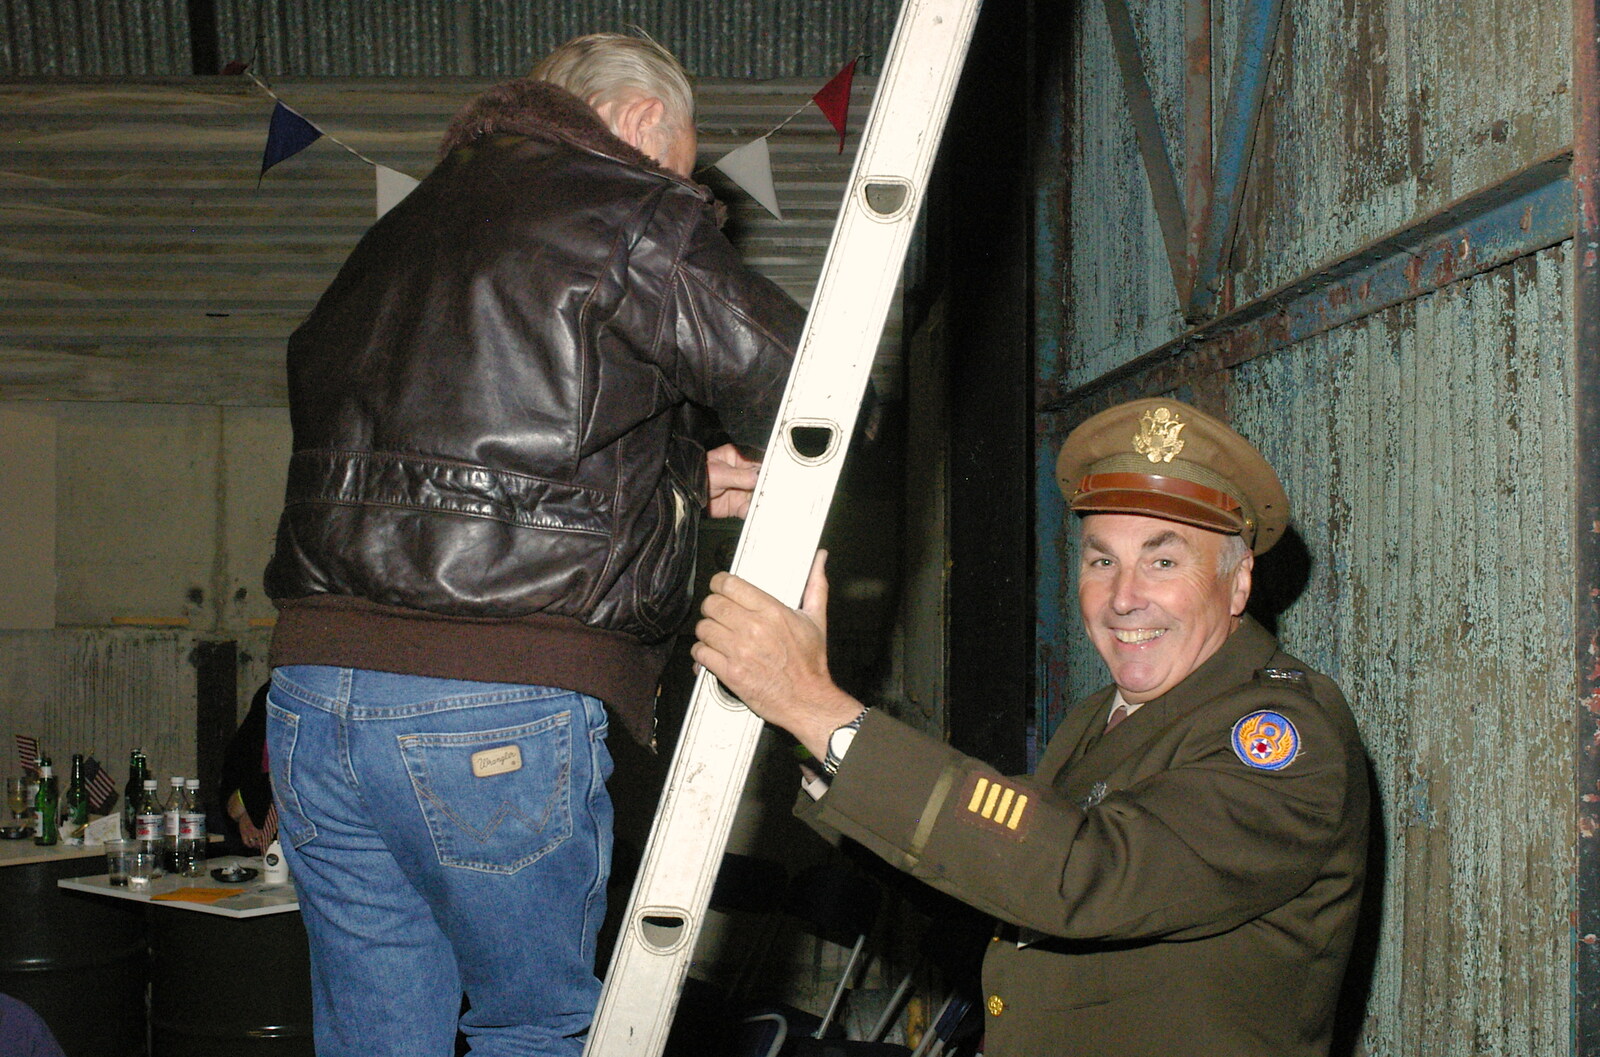 A ladder is held up by Richard, the co-owner from A 1940s VE Dance At Debach Airfield, Debach, Suffolk - 11th June 2005